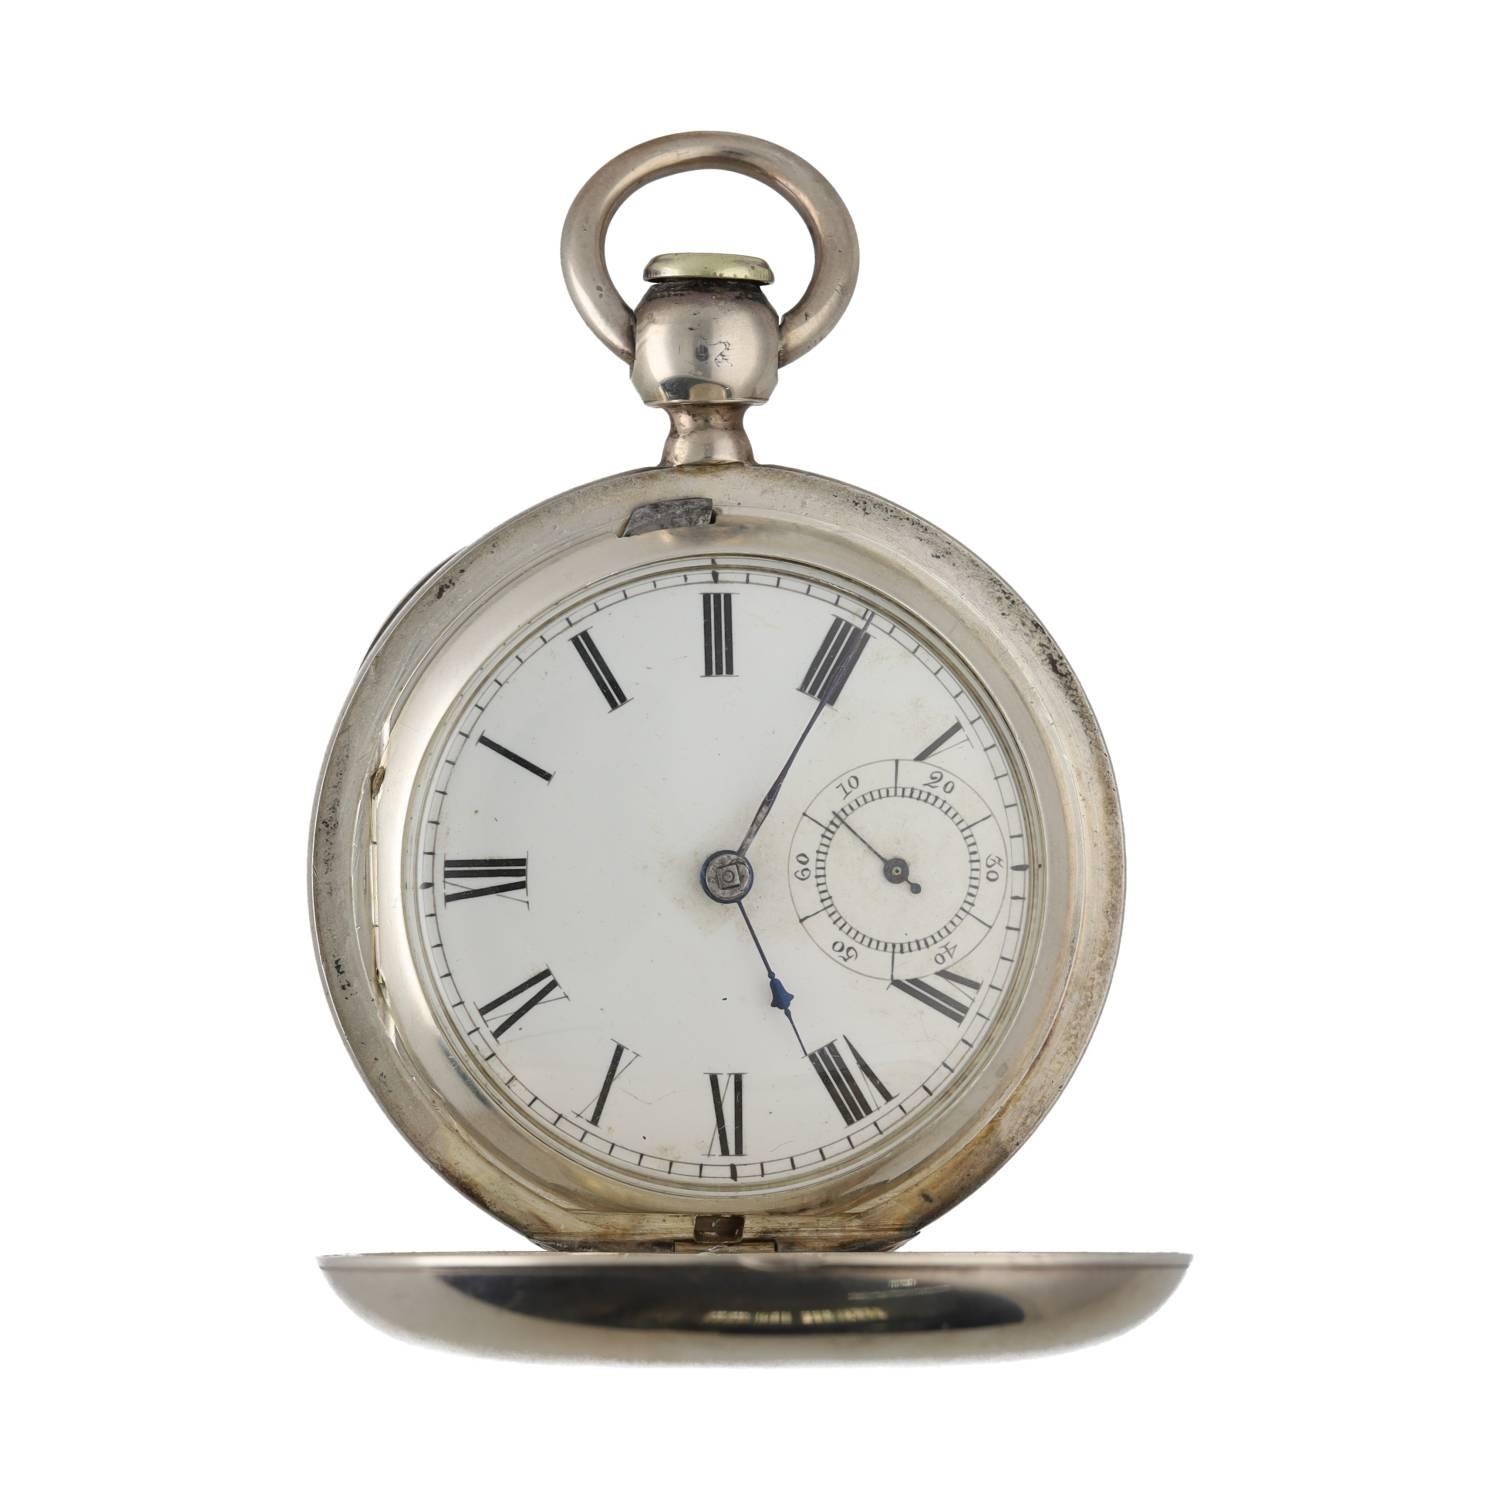 W. H. Ferry, Elgin, Illinois coin silver lever hunter pocket watch, signed movement with Patent